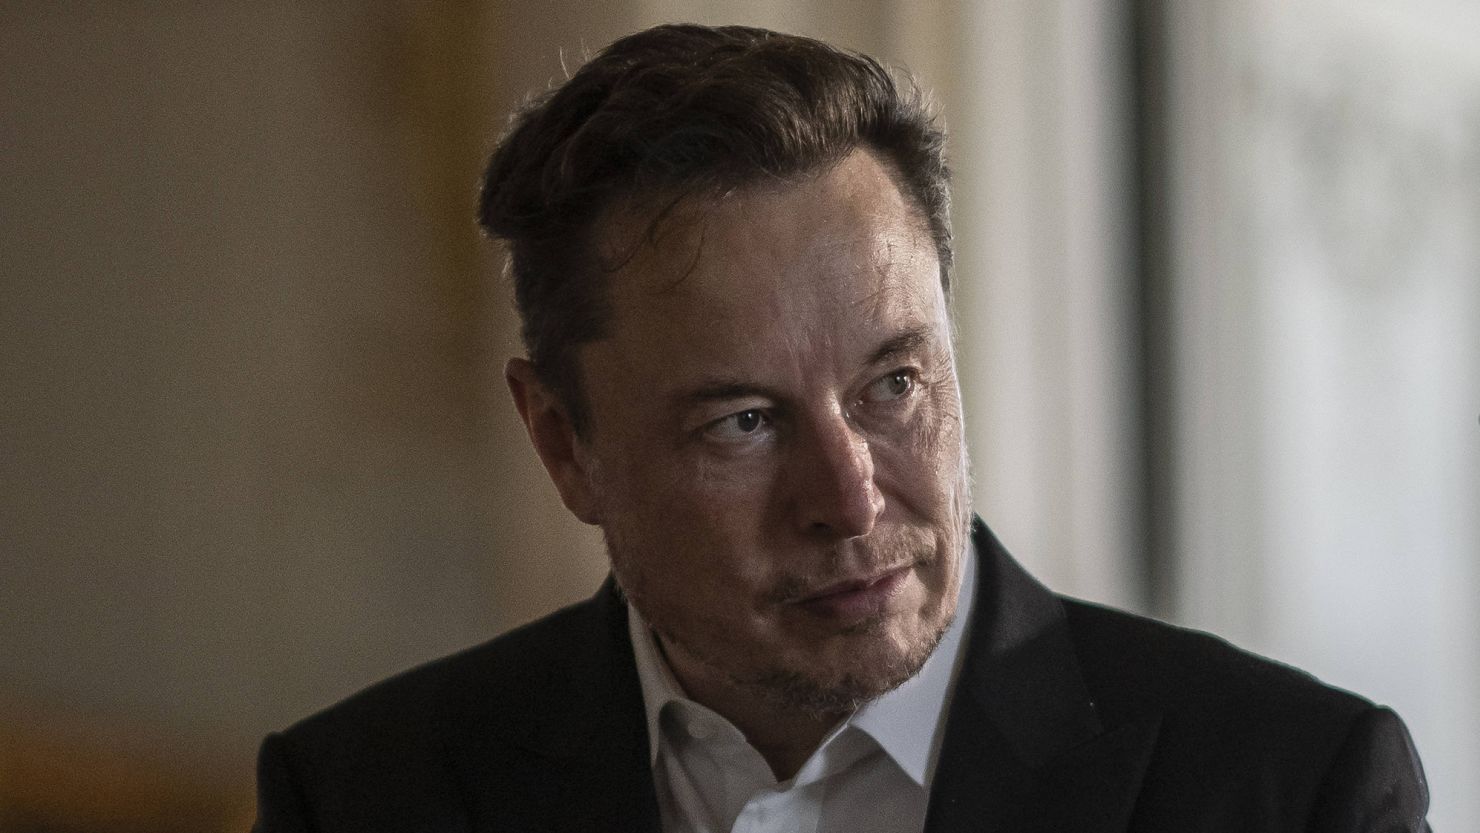 Elon Musk is being sued for insider trading